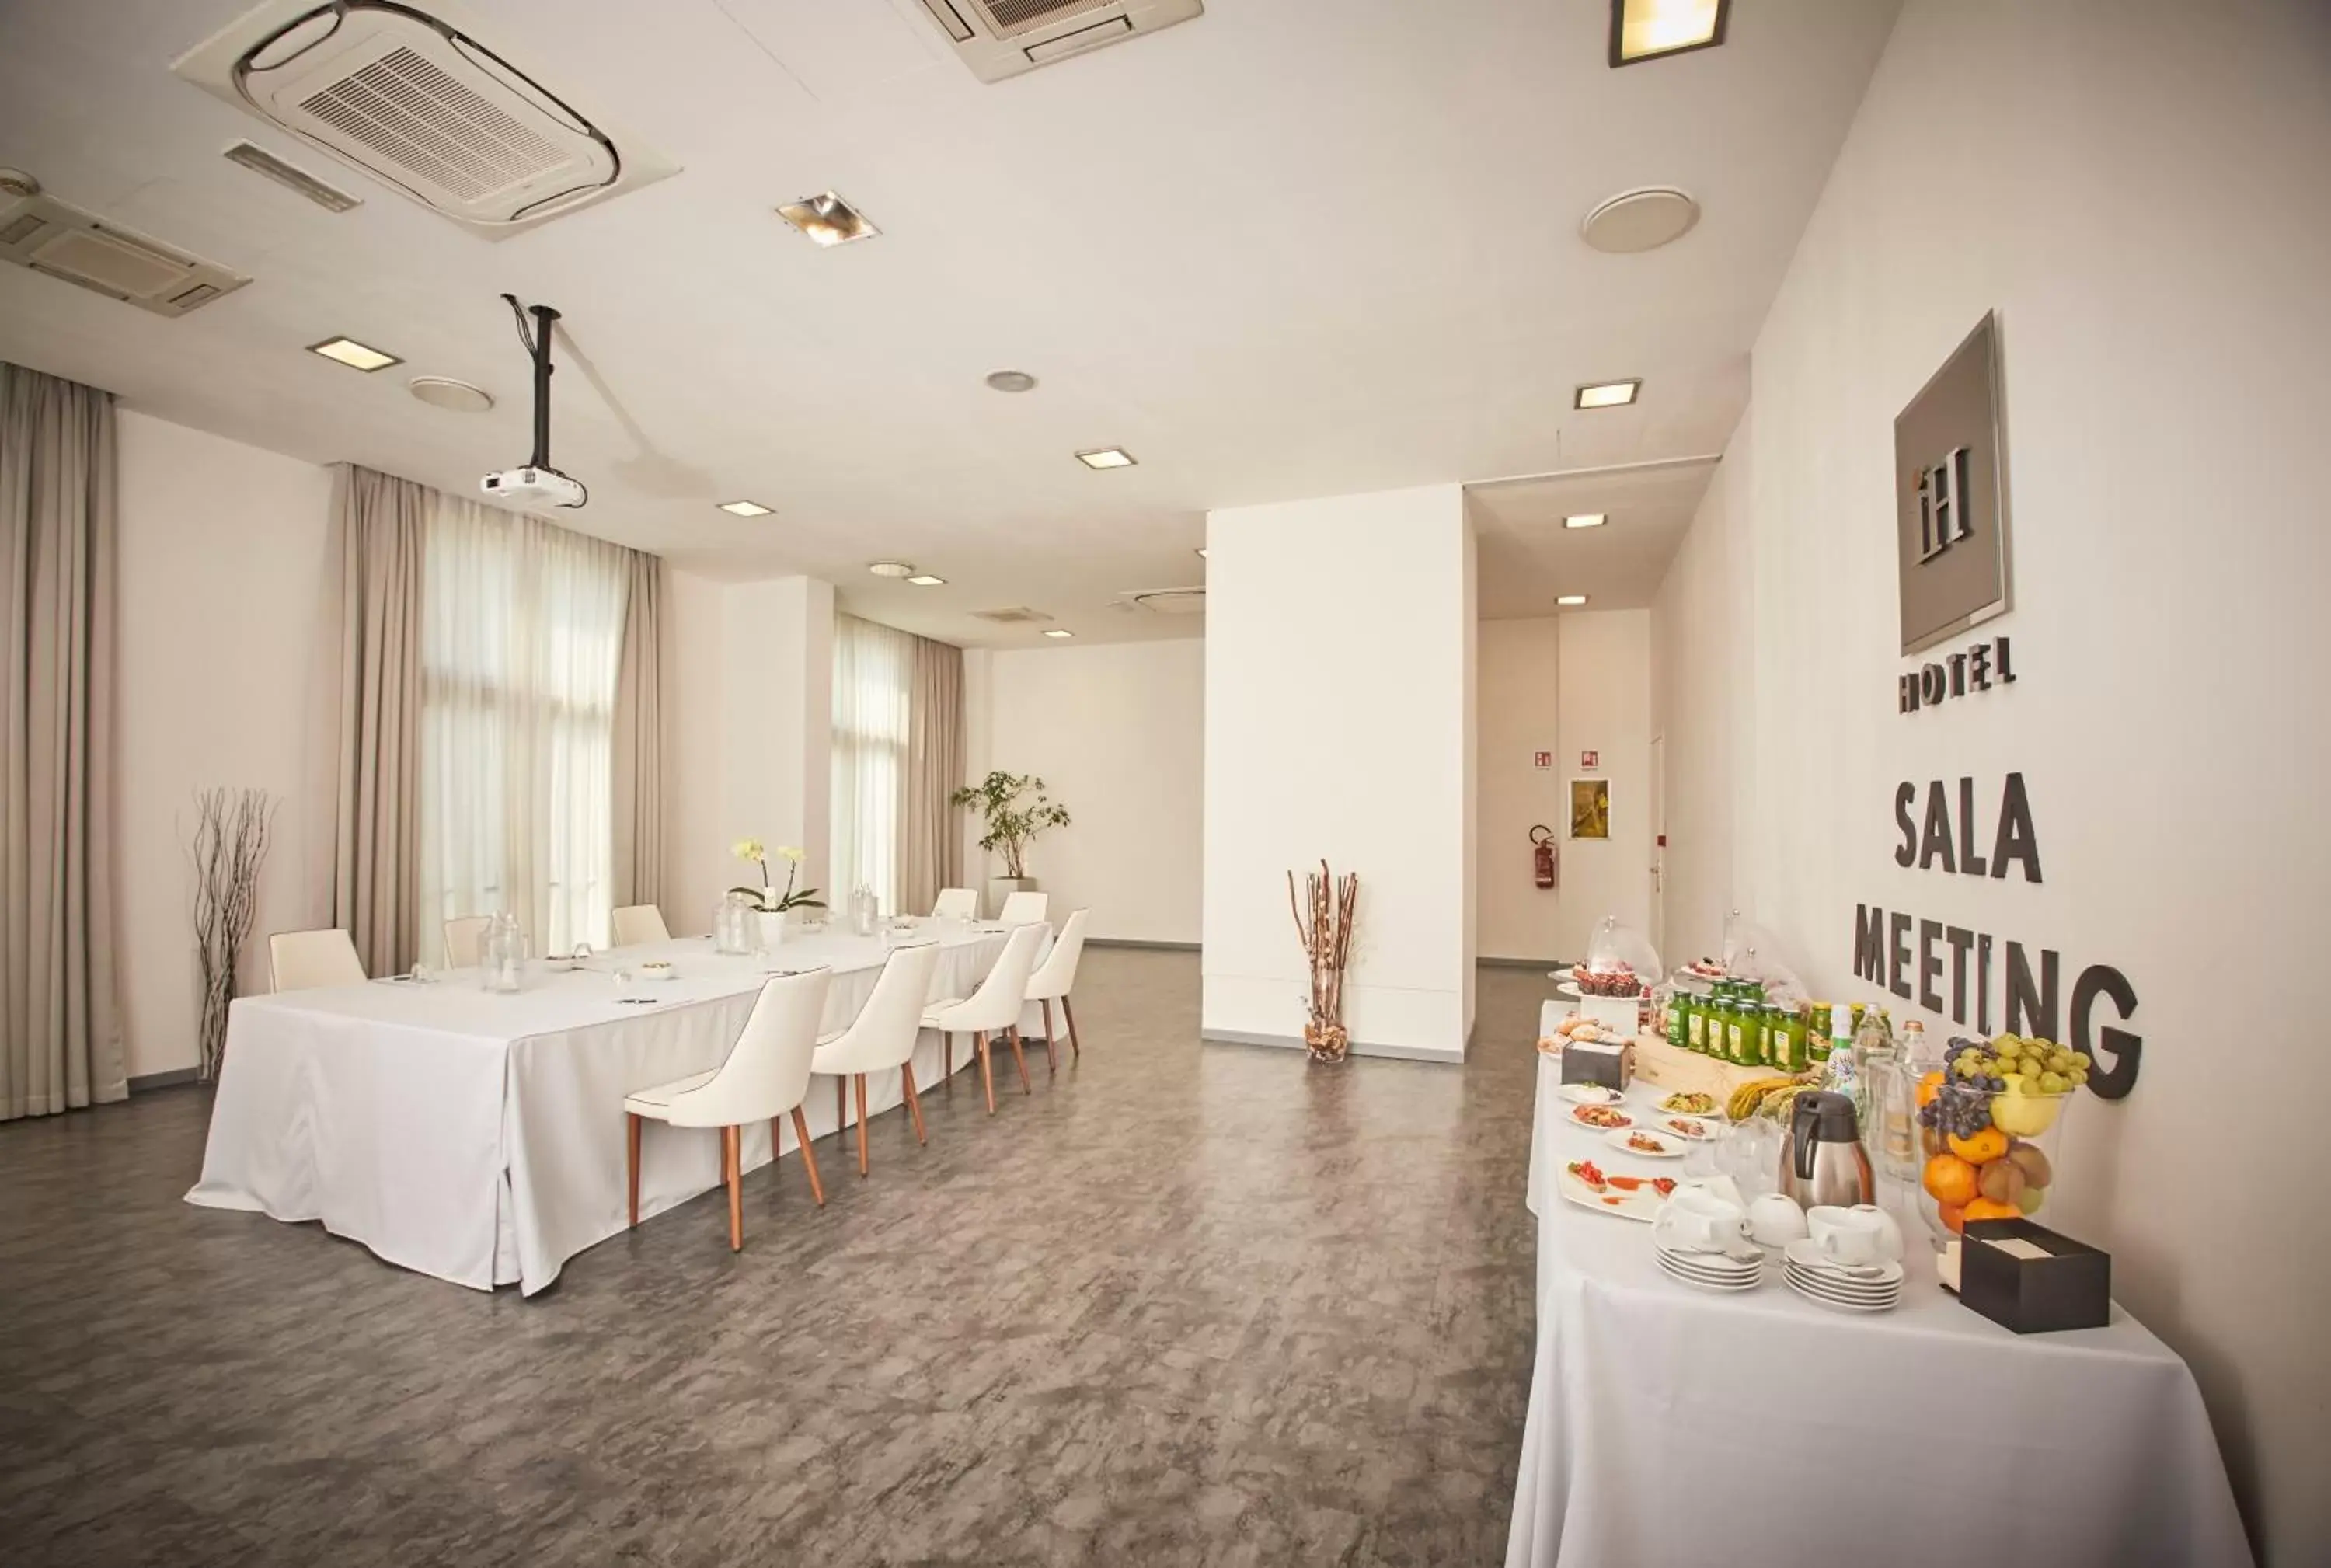 Meeting/conference room, Restaurant/Places to Eat in iH Hotels Milano Lorenteggio